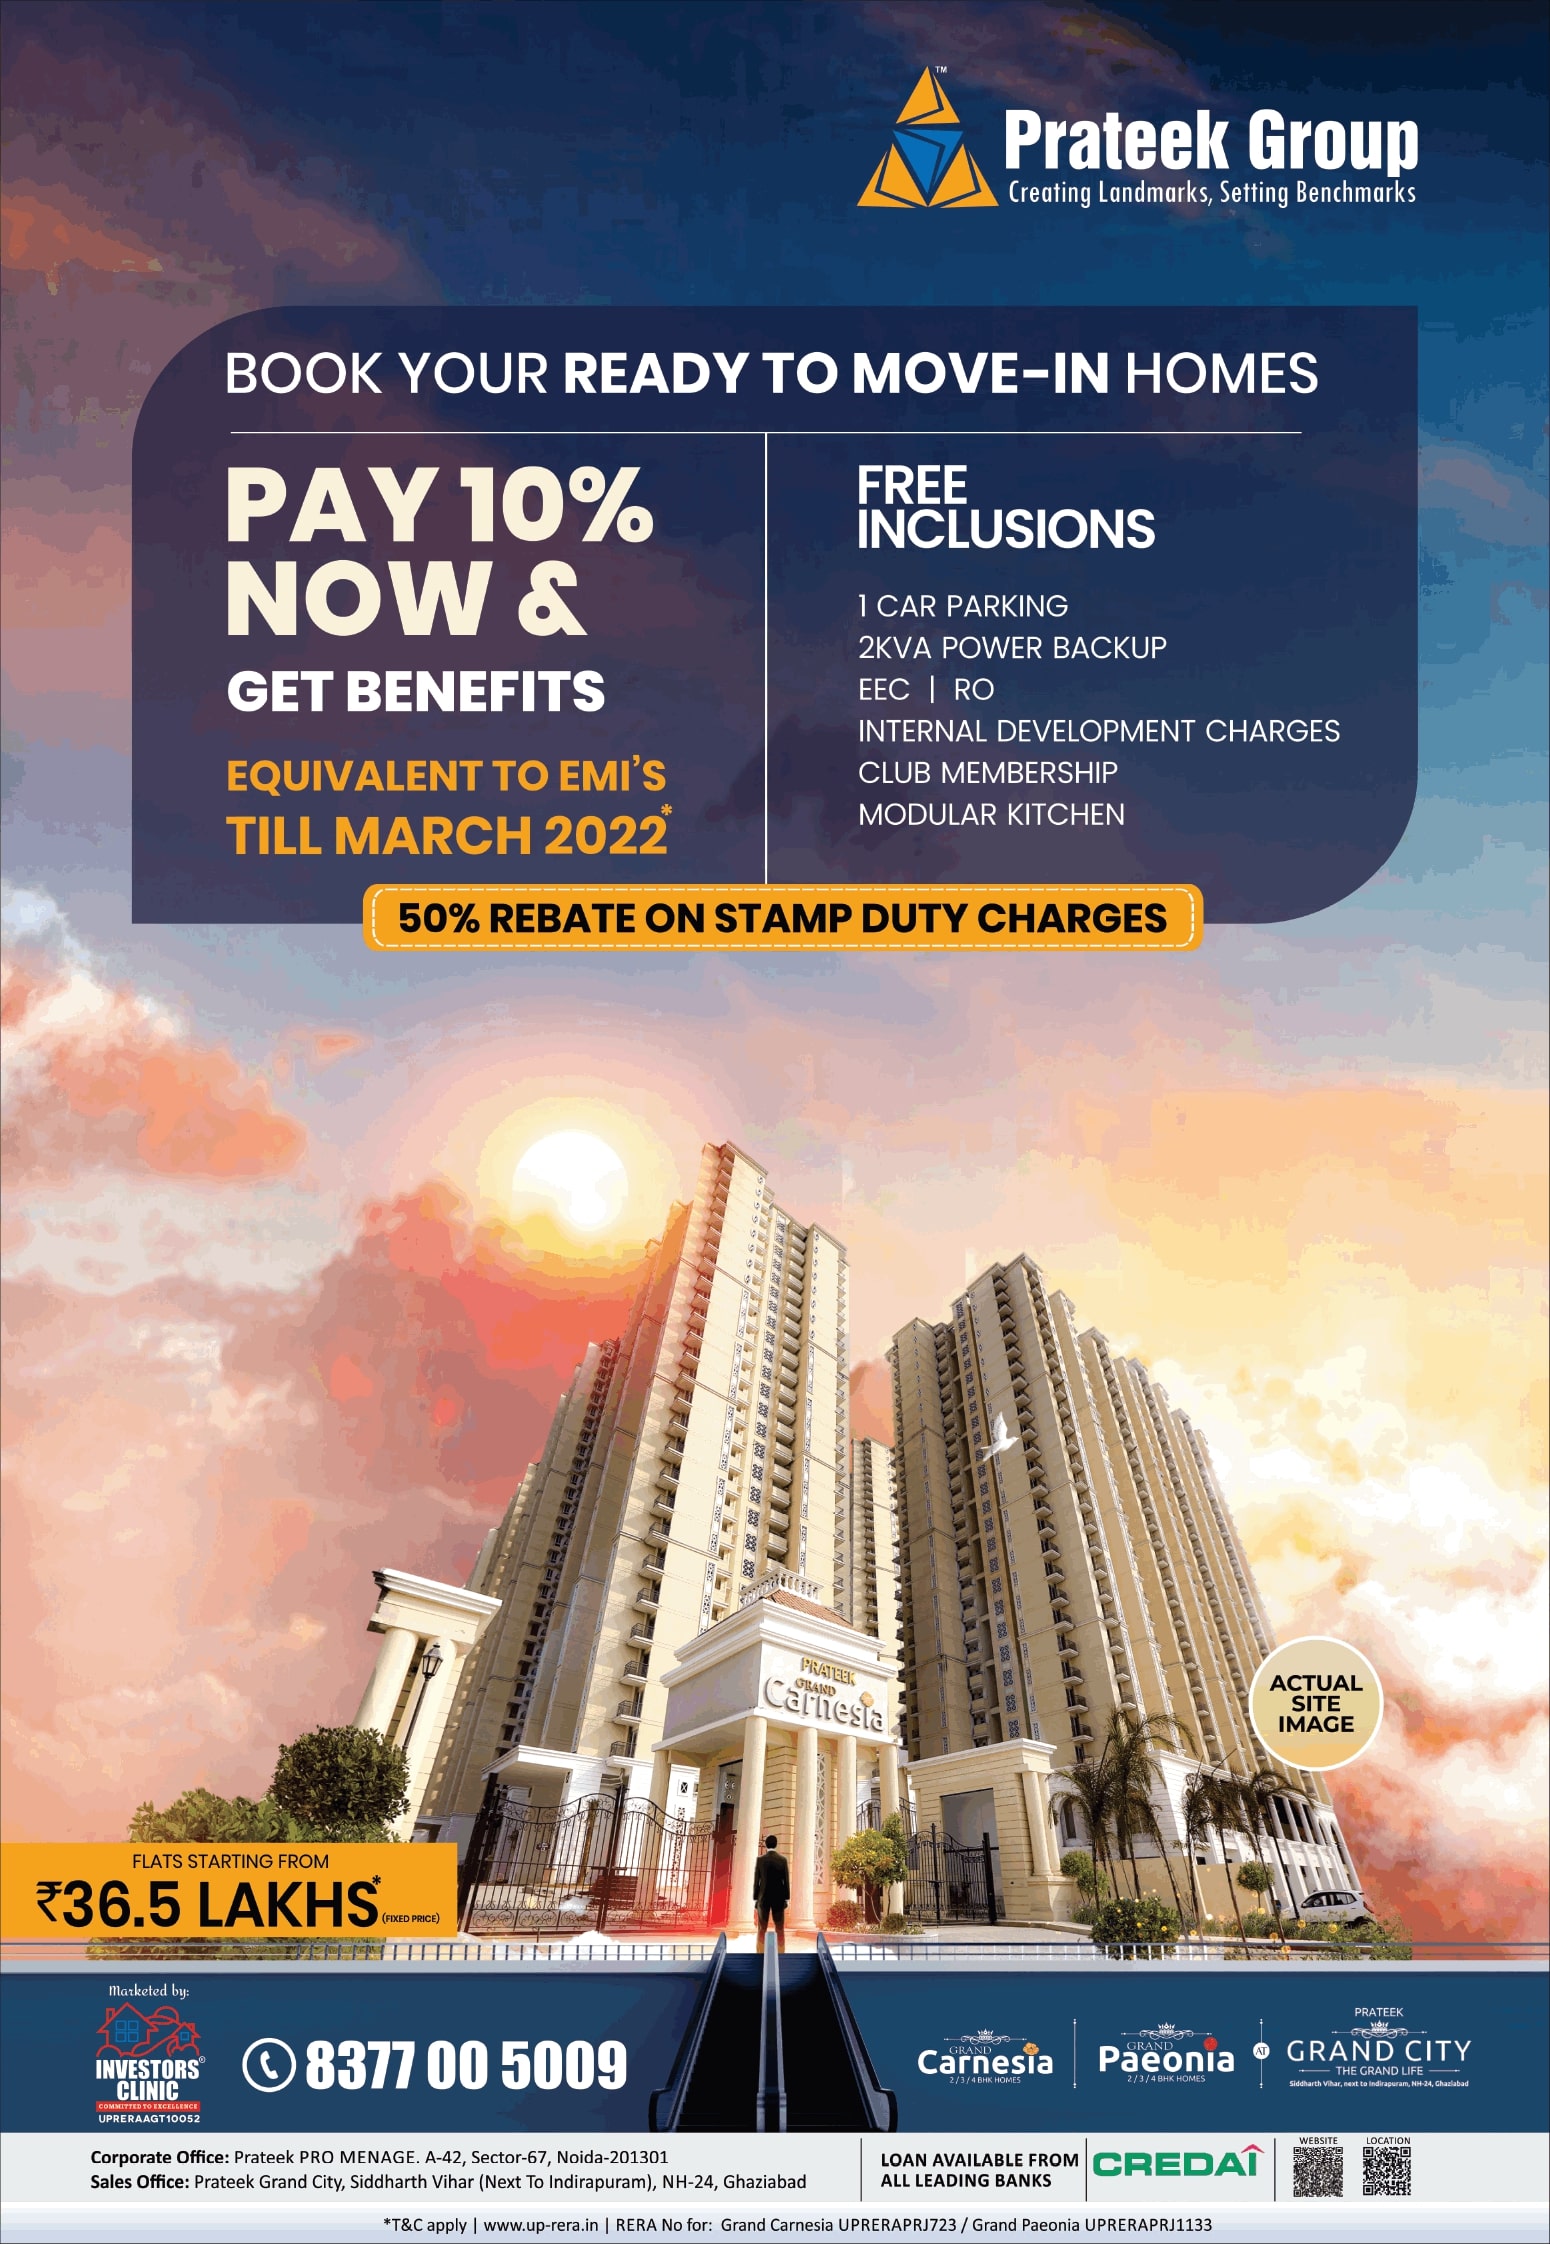 prateek-group-book-your-ready-to-move-in-homes-ad-delhi-times-10-04-2021